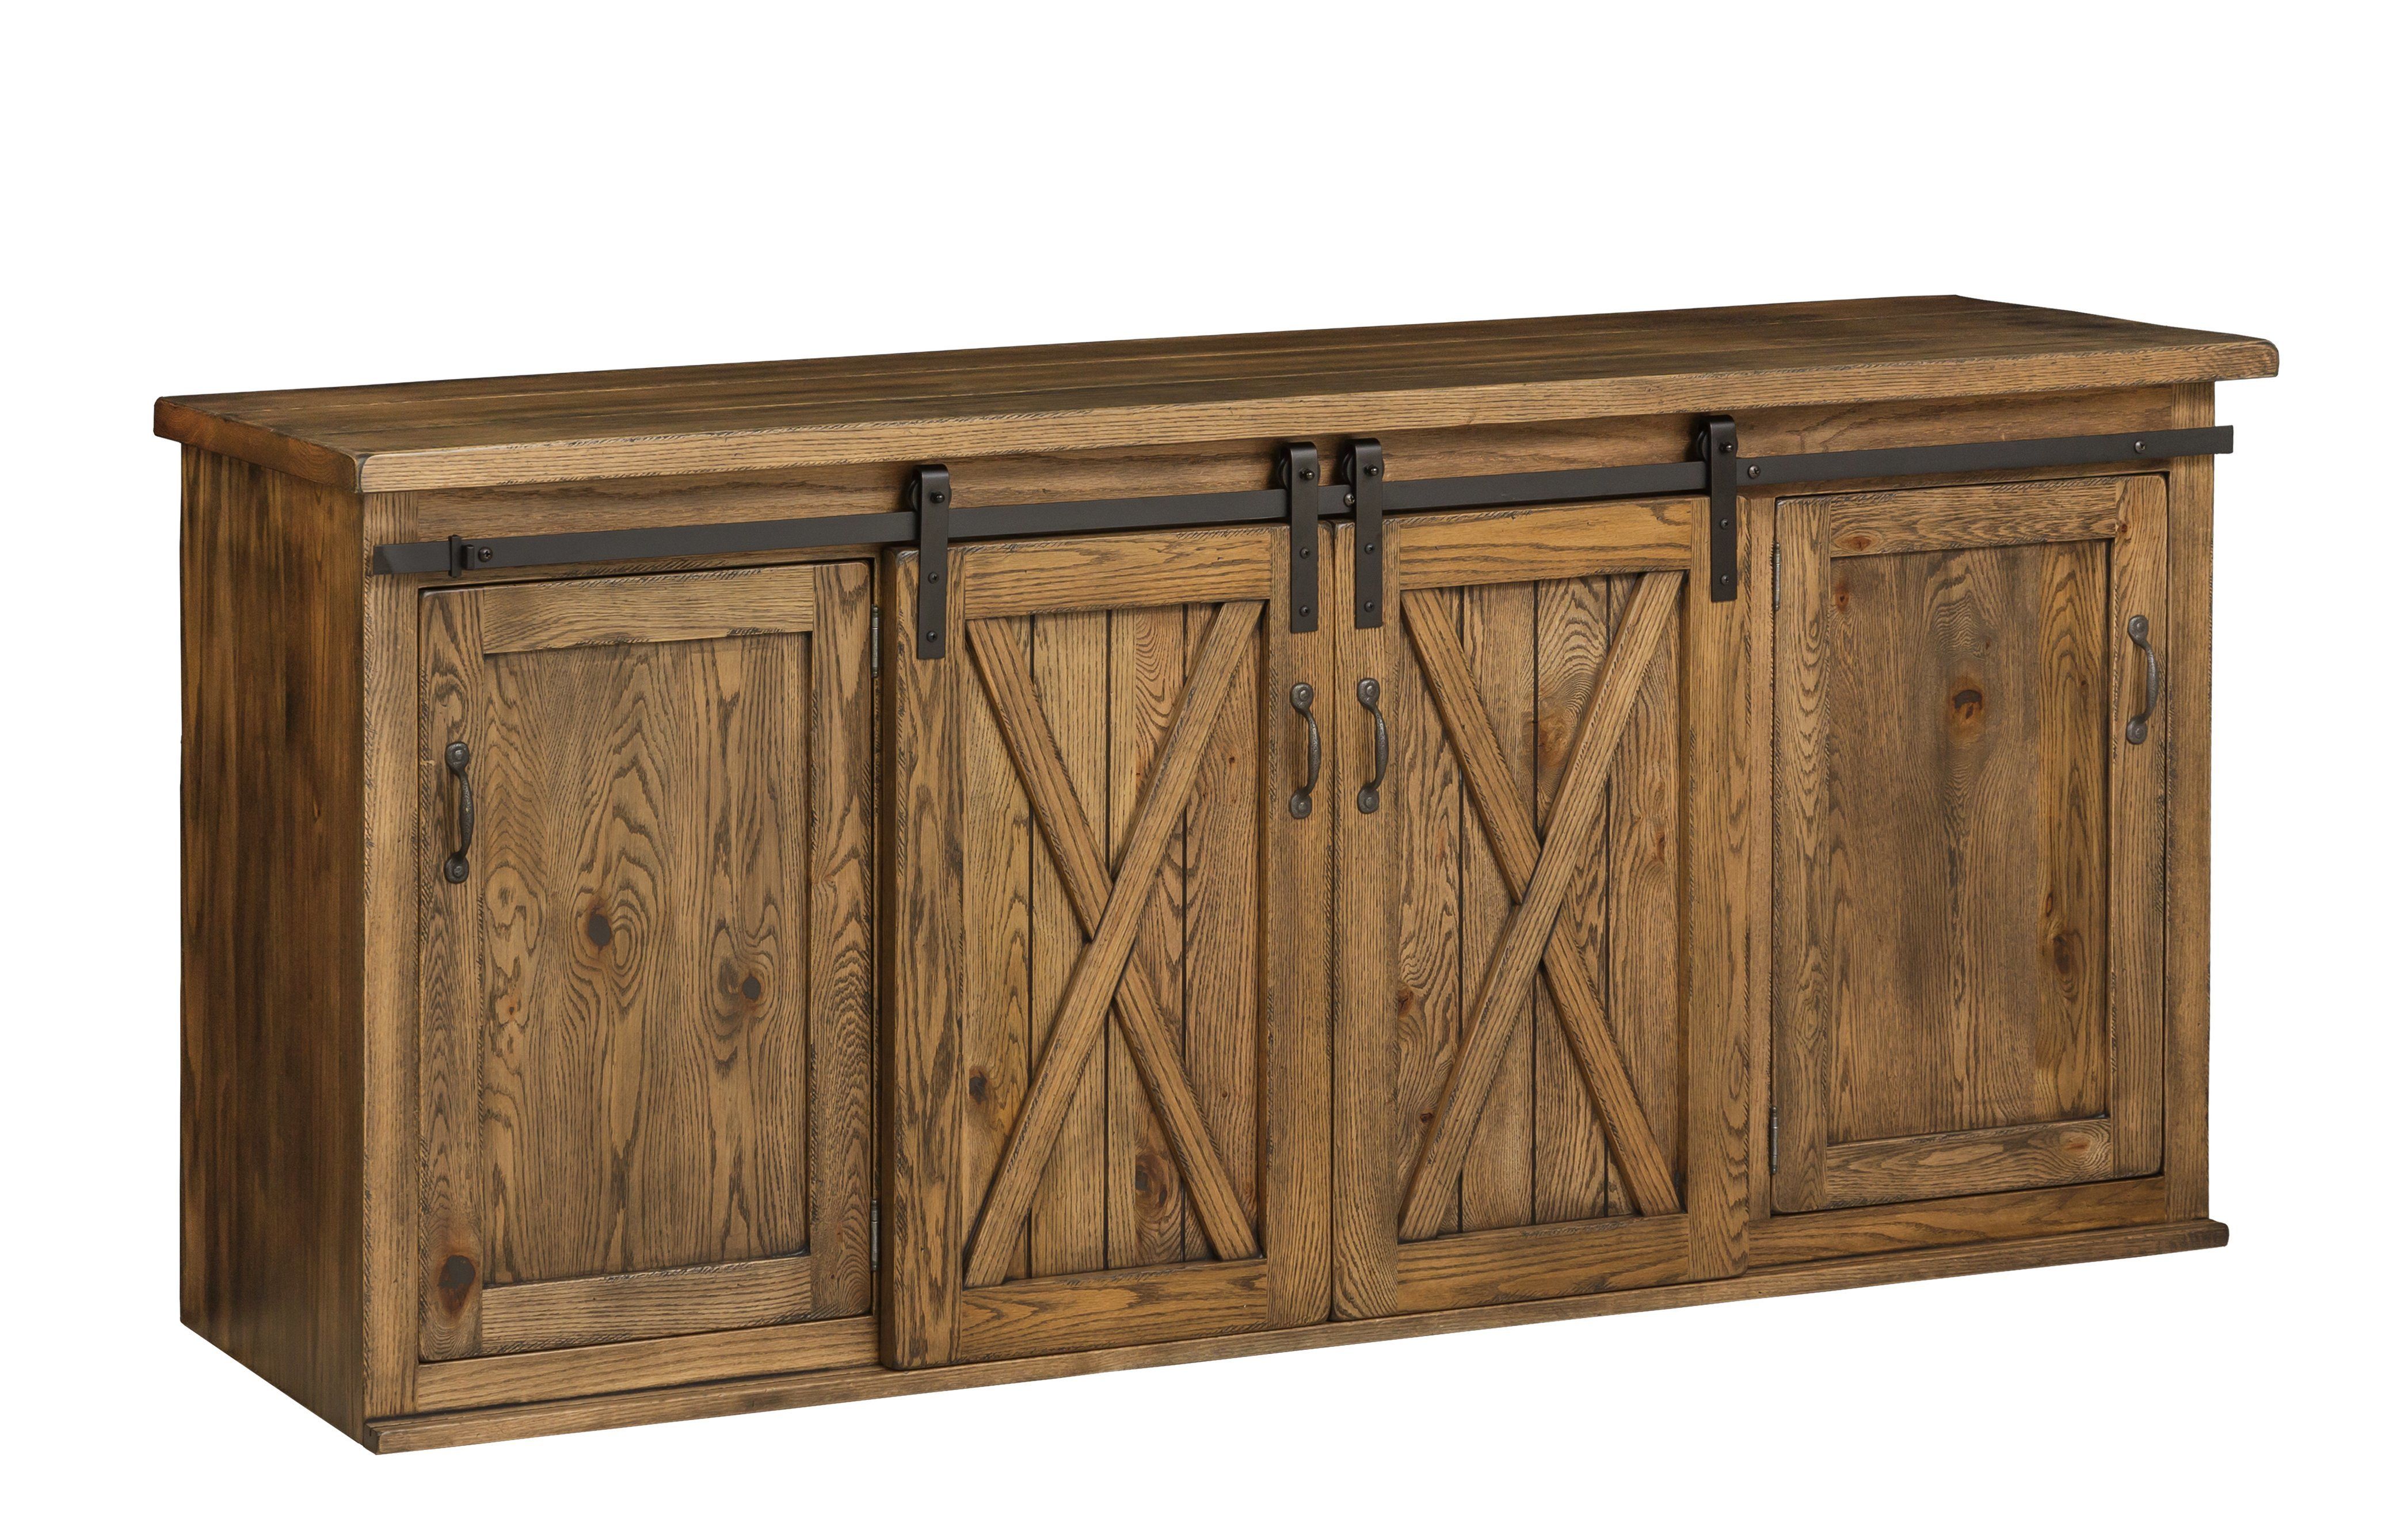 New England 74" Dining Buffet With Sliding Barn Doors From Intended For Sideboards Double Barn Door Buffet (View 5 of 15)